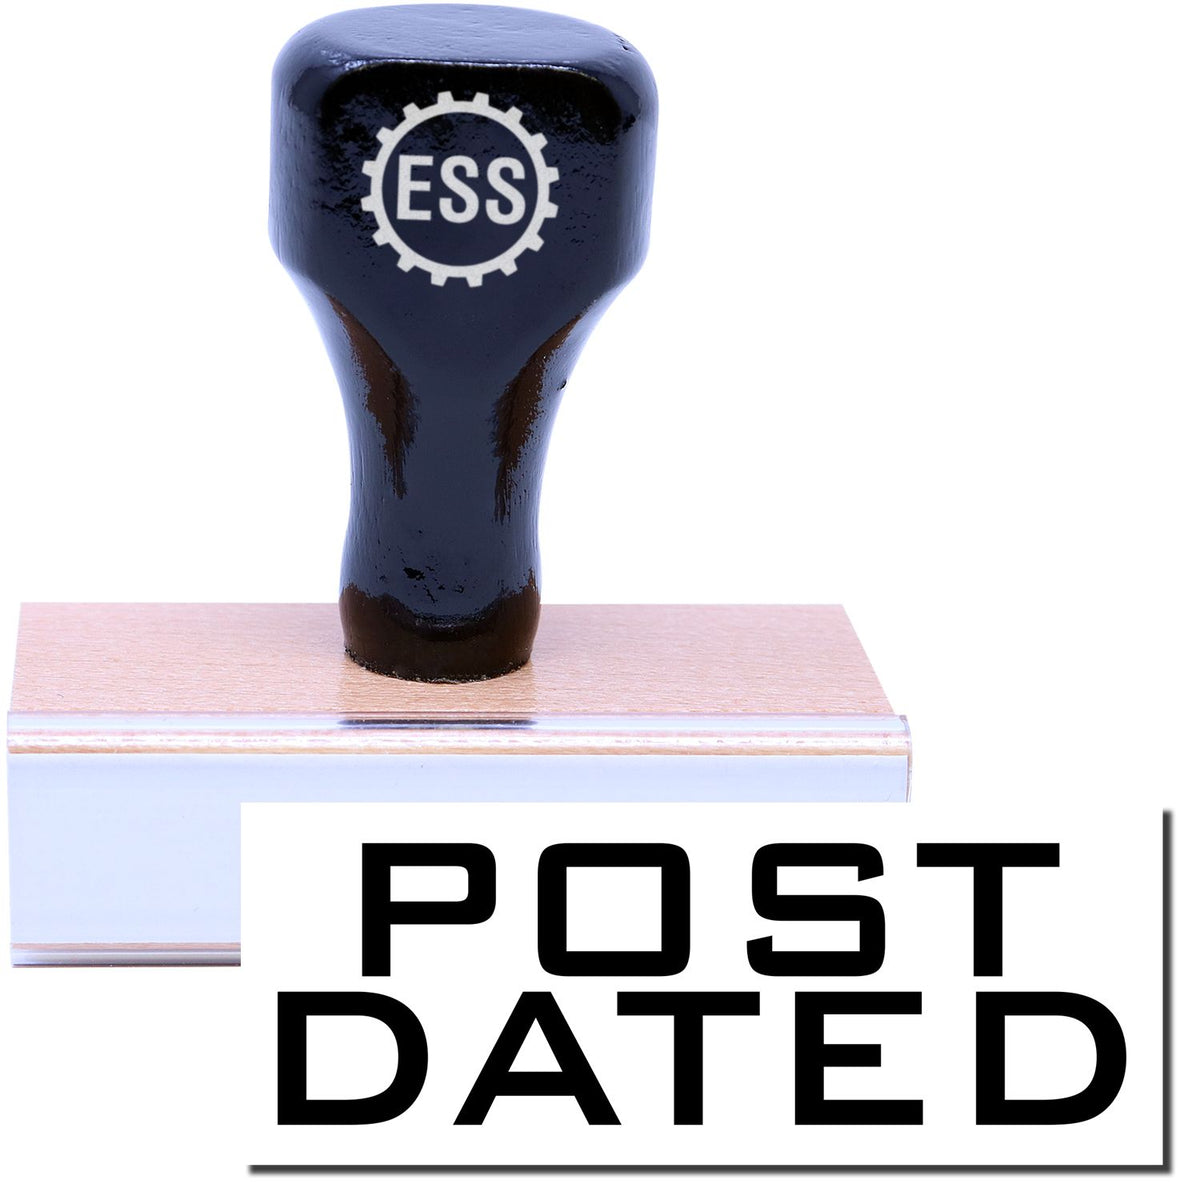 A stock office rubber stamp with a stamped image showing how the text &quot;POST DATED&quot; is displayed after stamping.